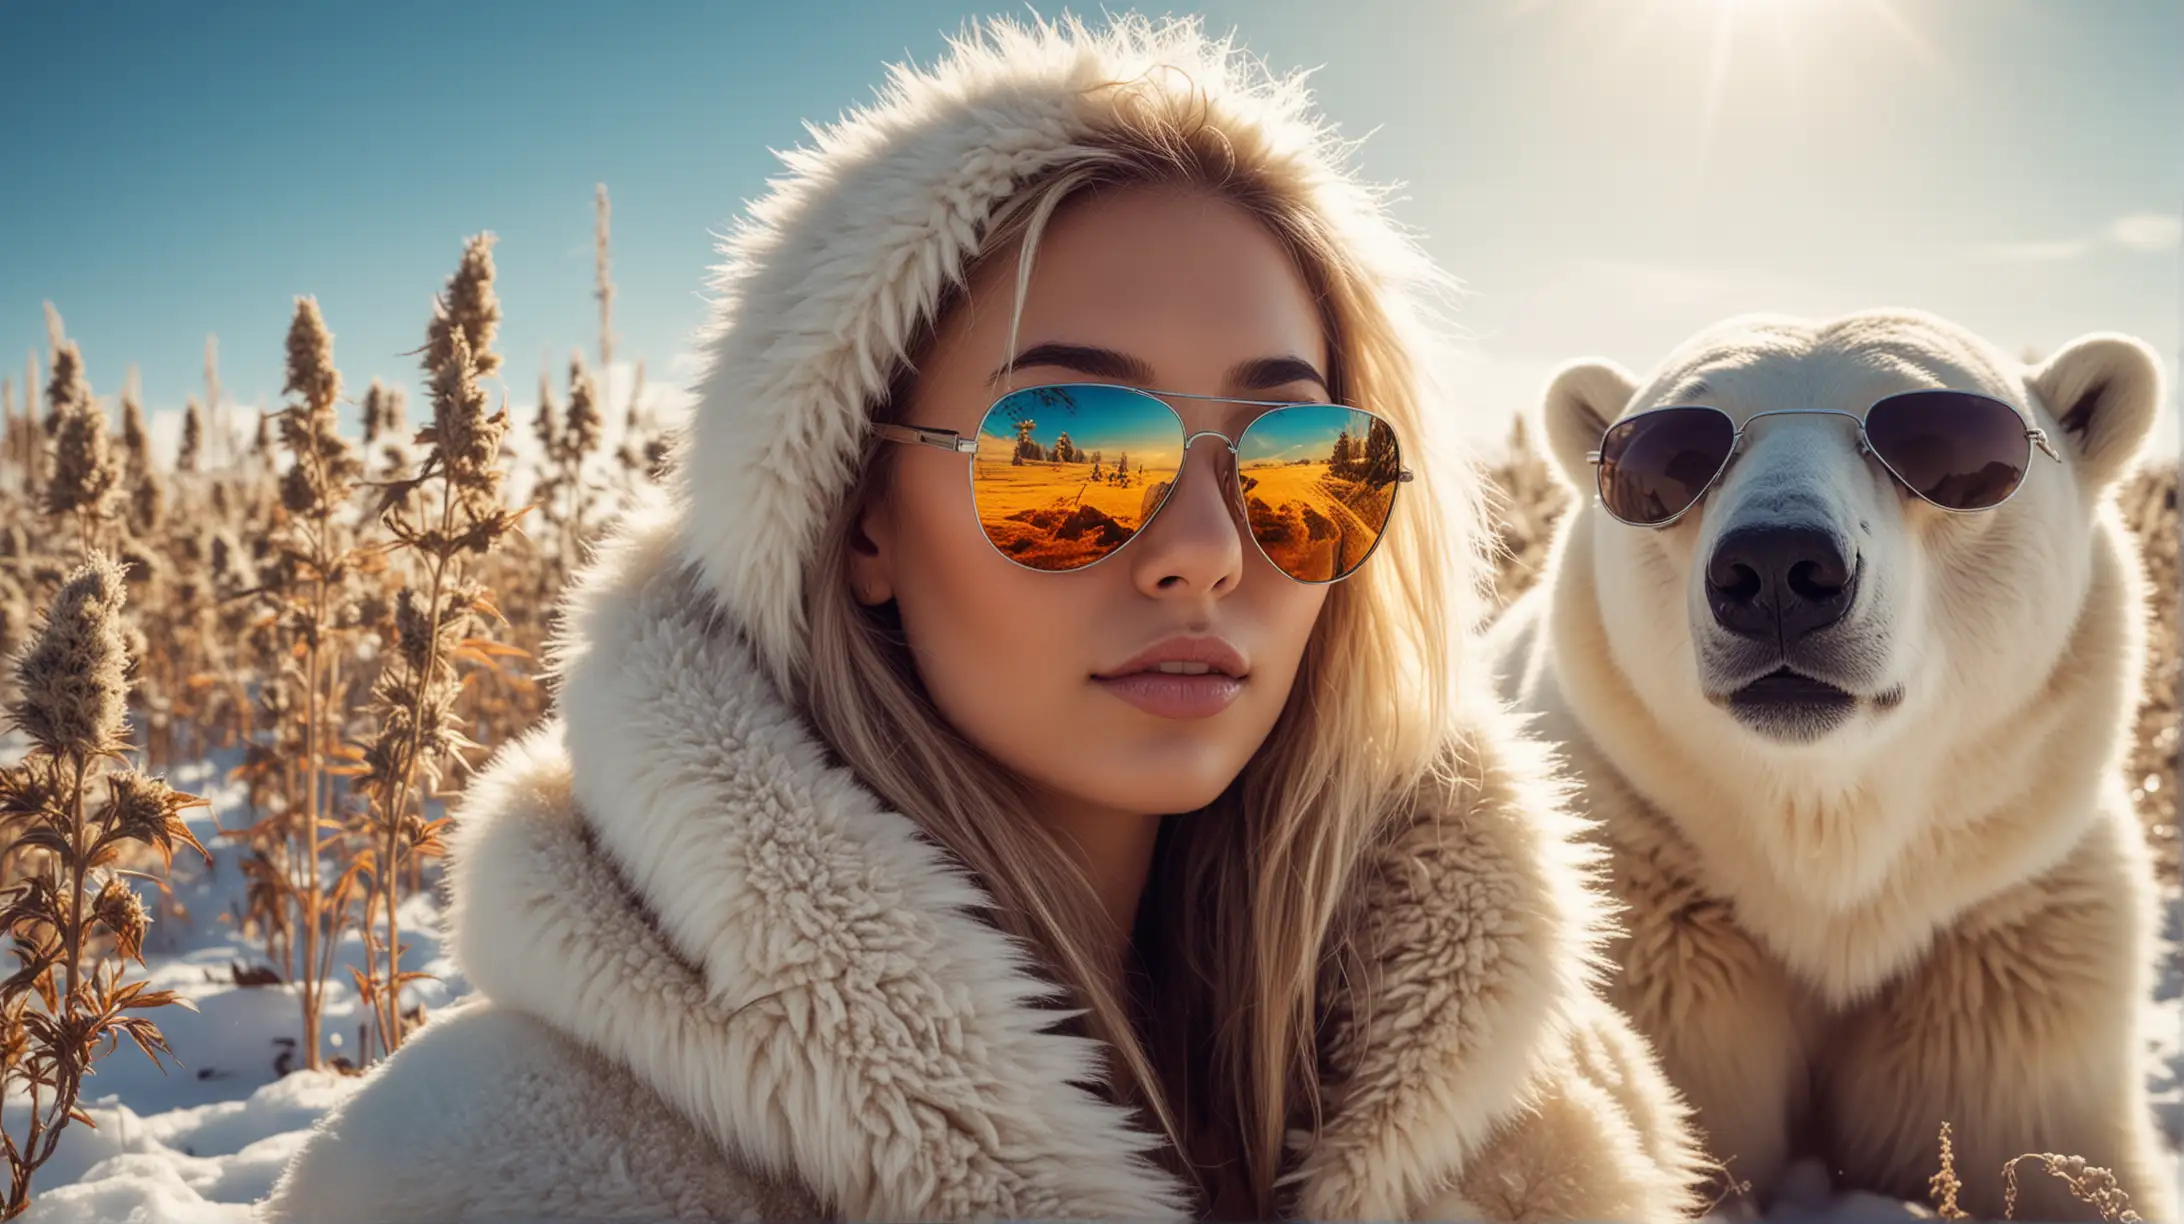 Exotic Woman in Cannabis Field with Stoned Polar Bear in Snow